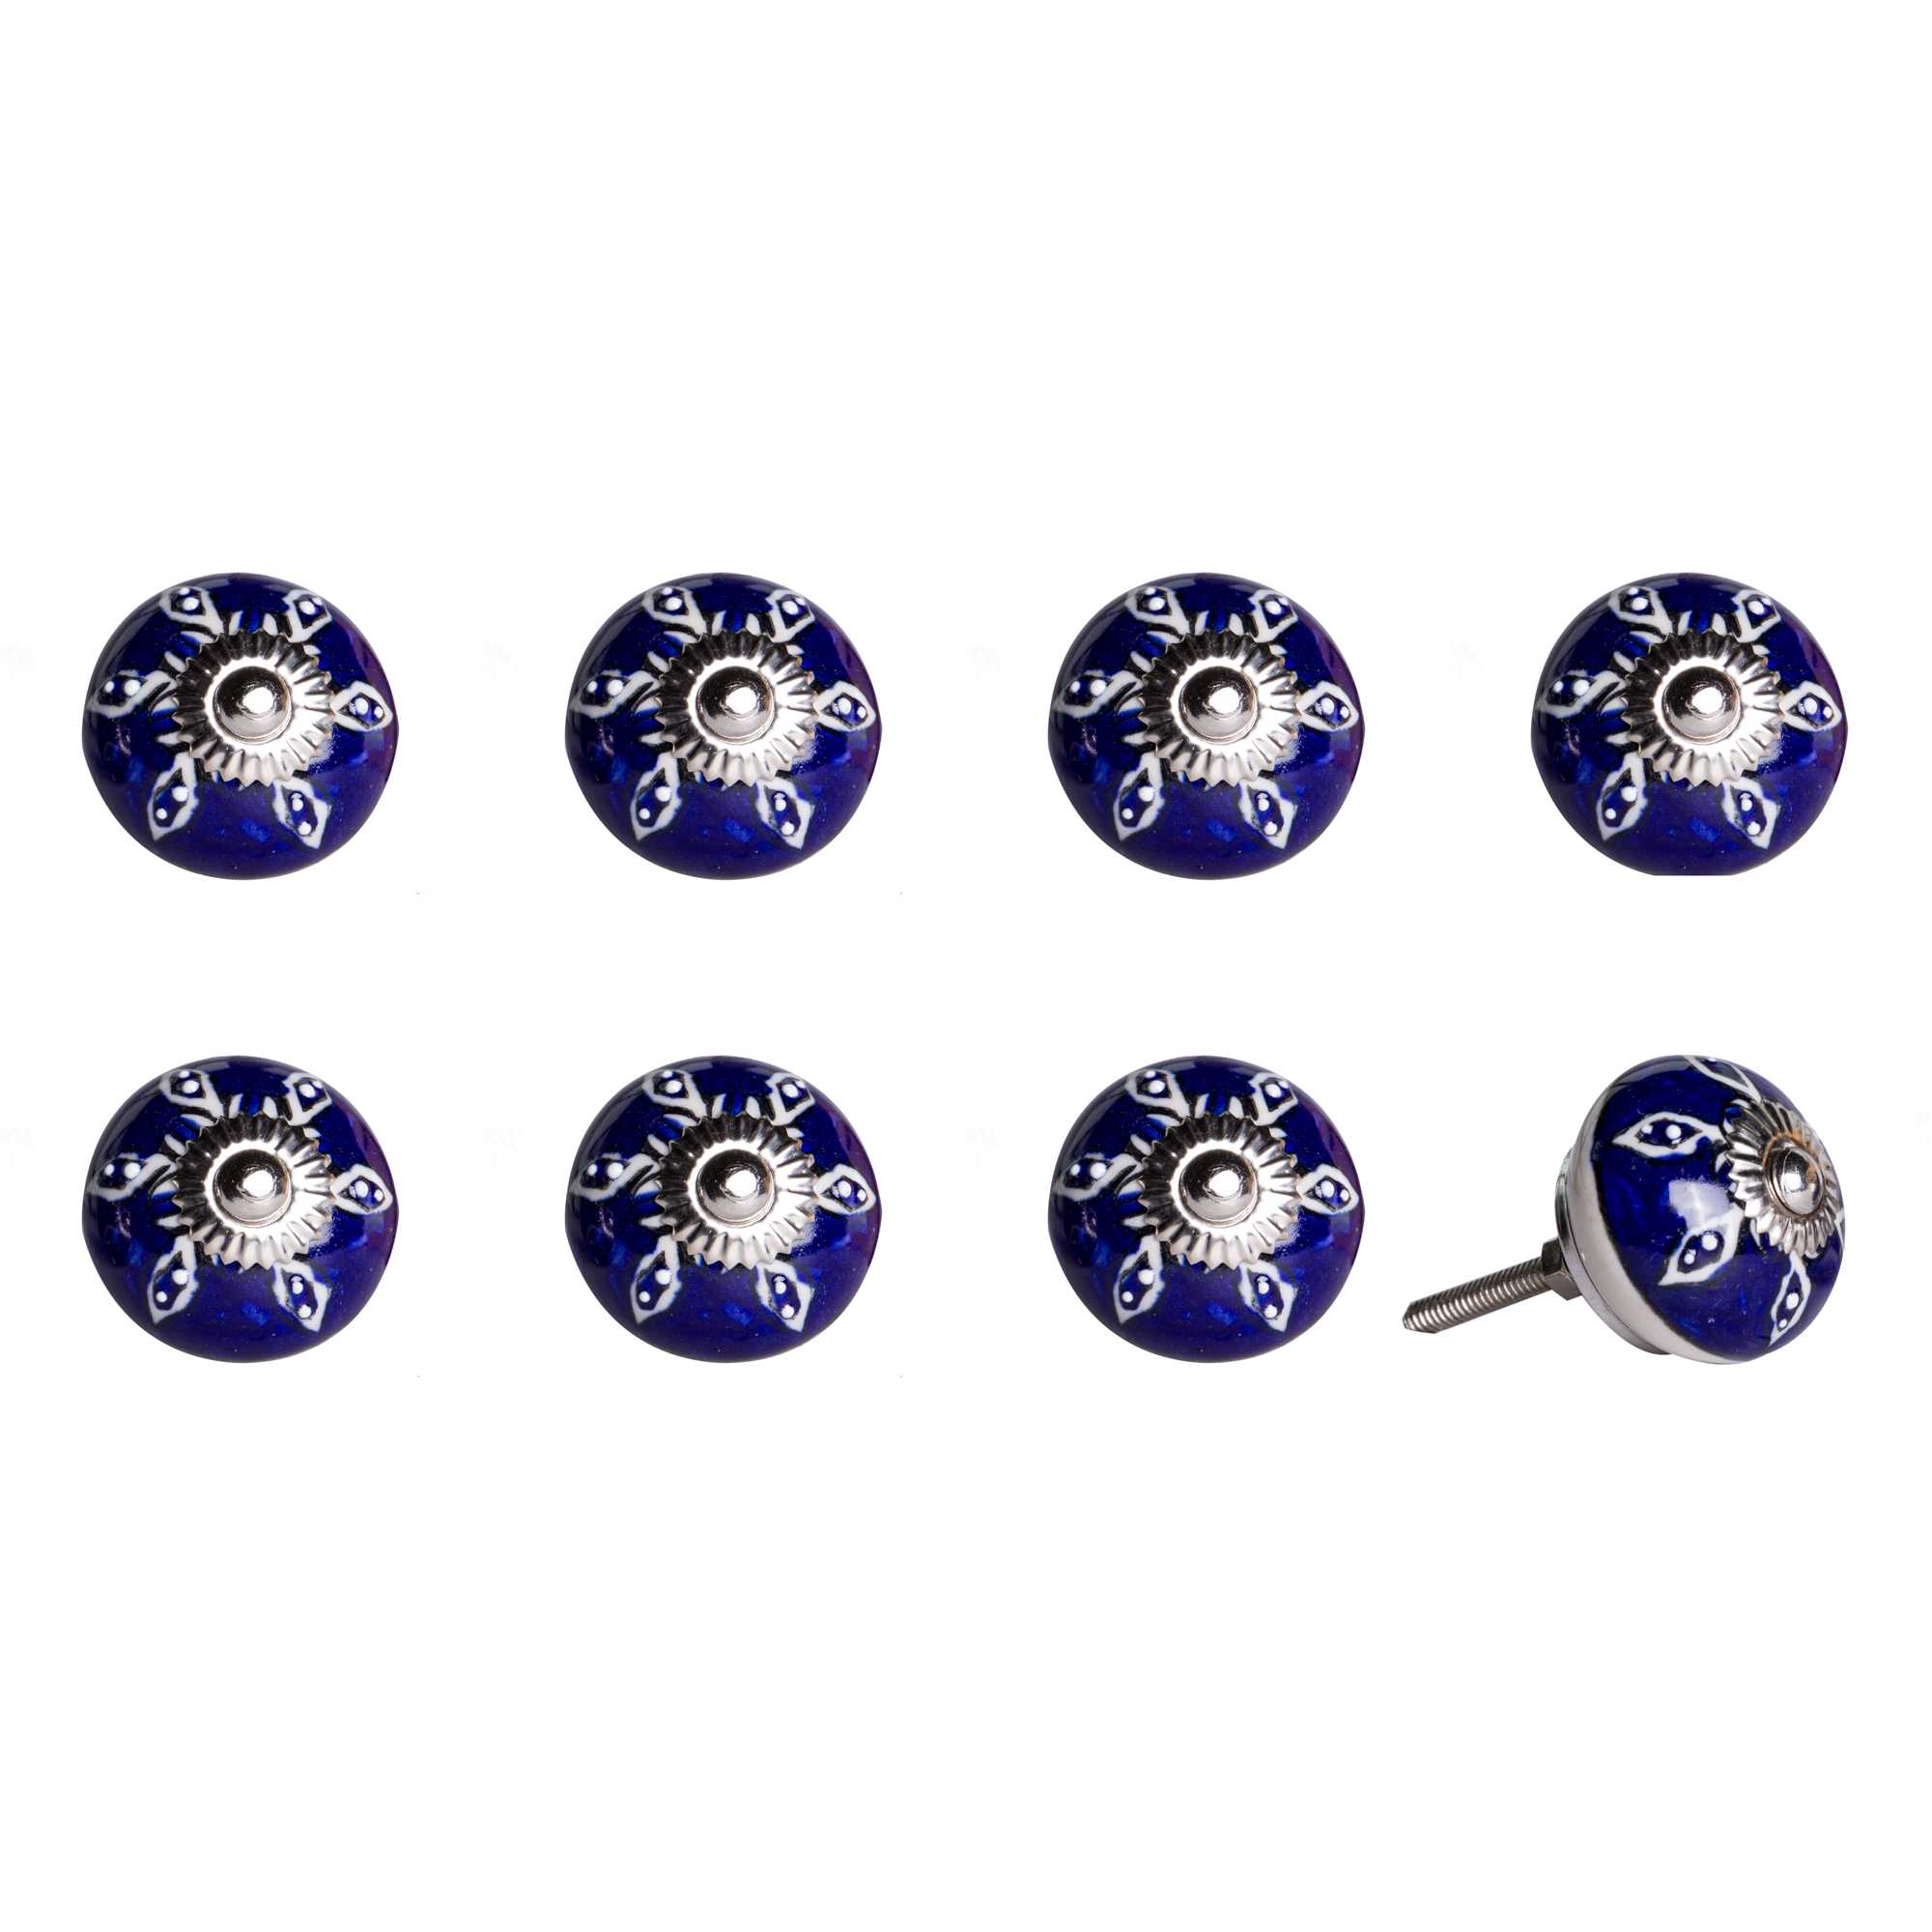 1.5" x 1.5" x 1.5" Hues Of White, Navy And Silver - Knobs 8-Pack